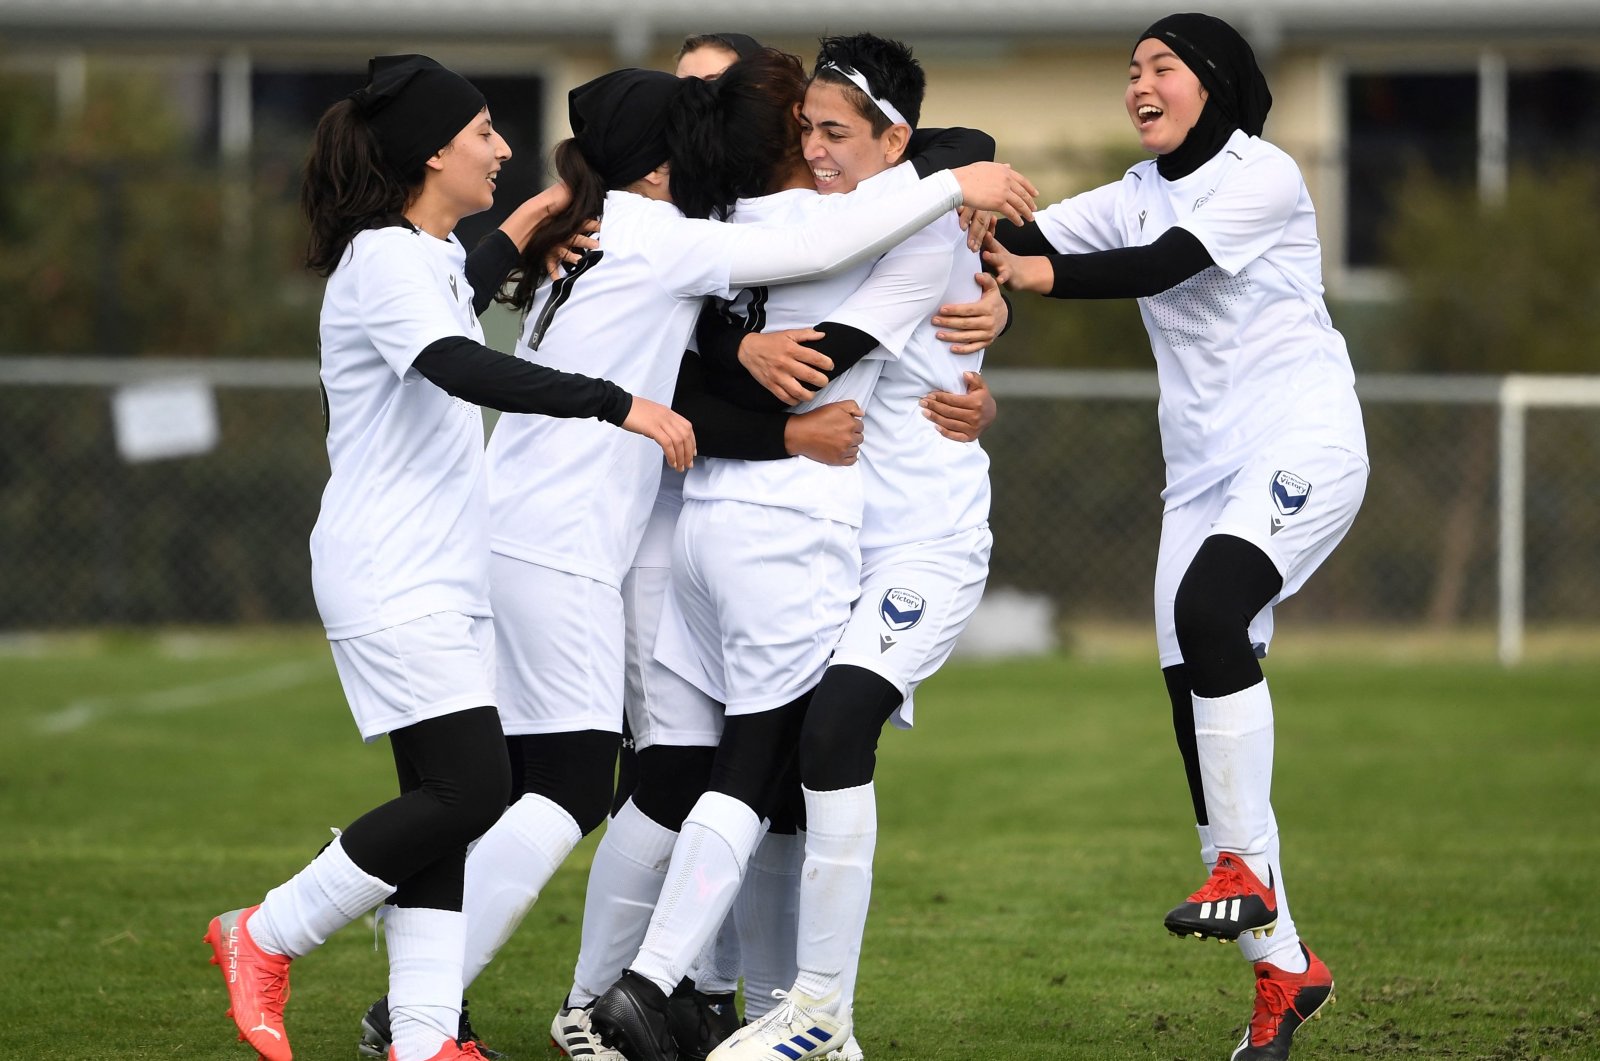 Melbourne Victory Afghan women&#039;s team players celebrate a goal, which was disallowed, during their first match in a local league, Melbourne, Australia, April 24, 2022. (AFP Photo)